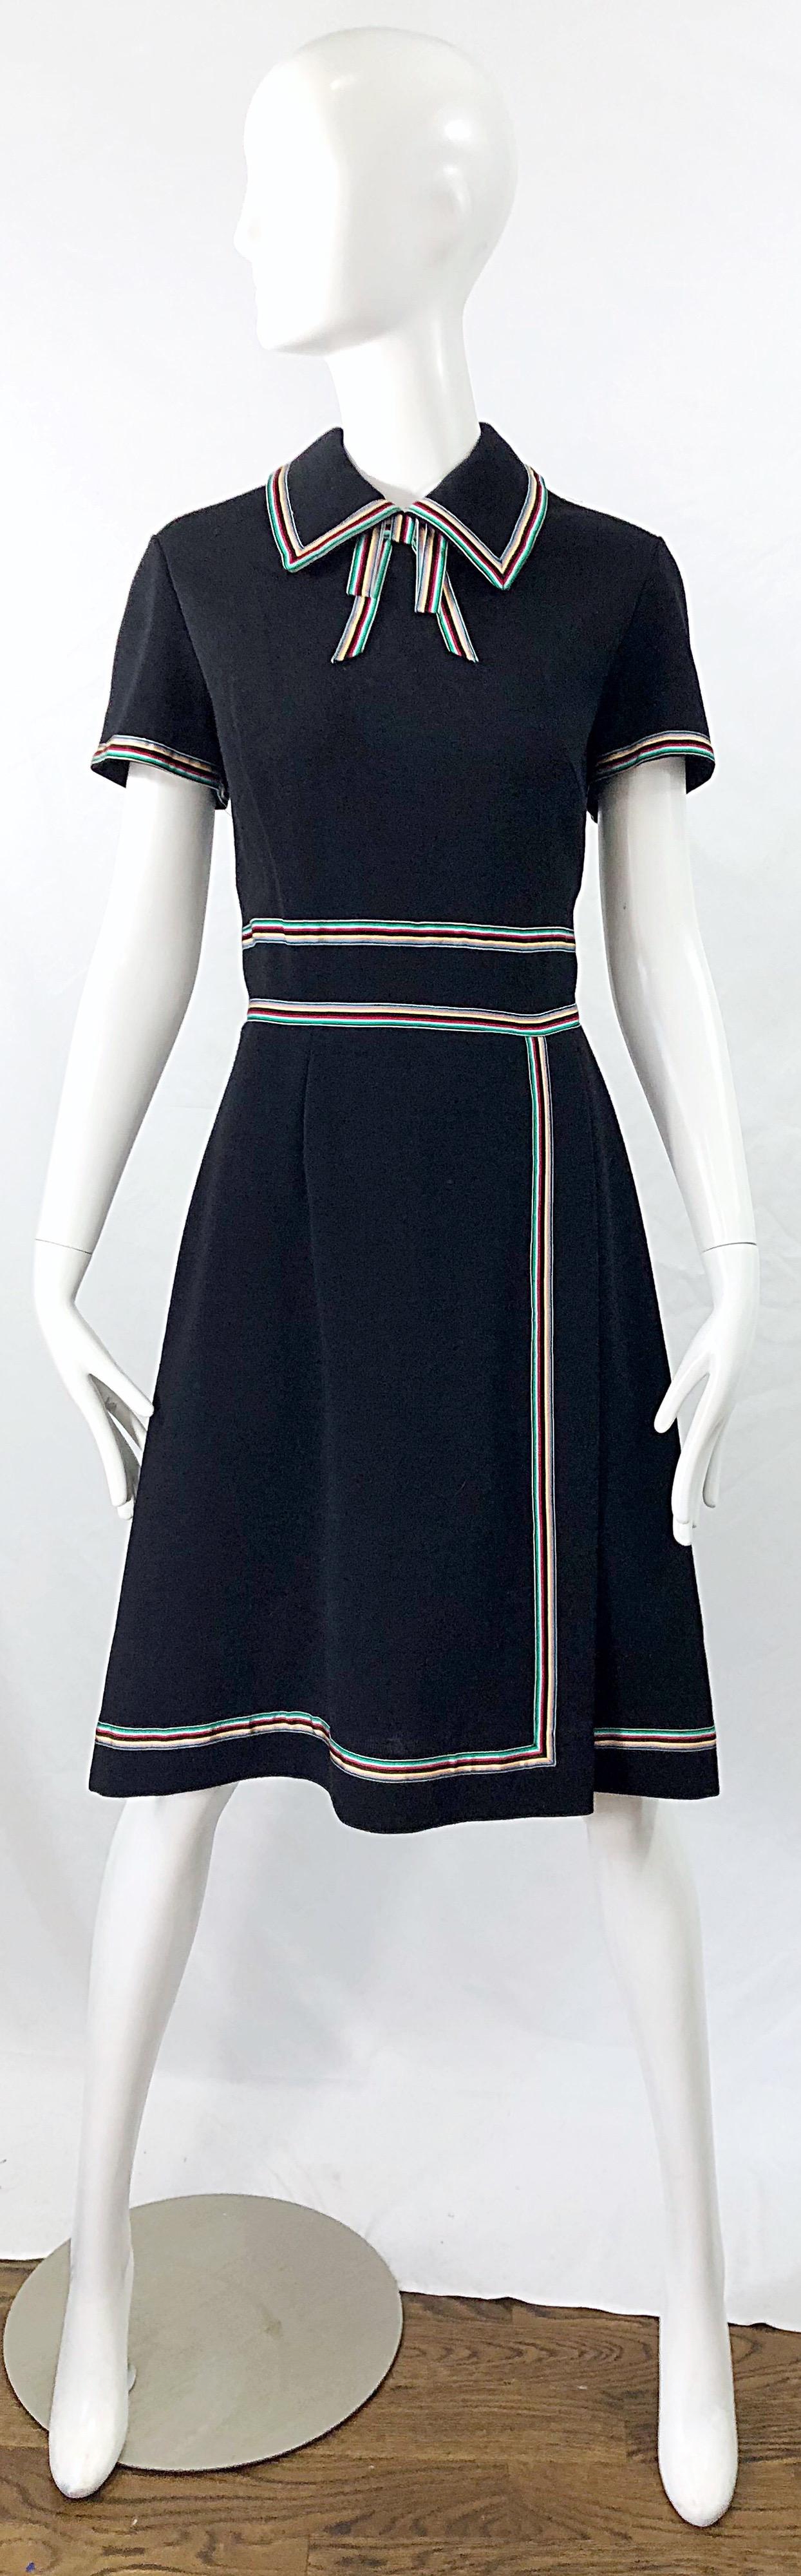 Chic 1960s black knit A-Line dress ! Features colorful ribbon details in green, yellow, red and black. Tailored bodice with an A-line forgiving skirt. Full metal zipper up the back with hook-and-eye closure. The perfect little black dress with that